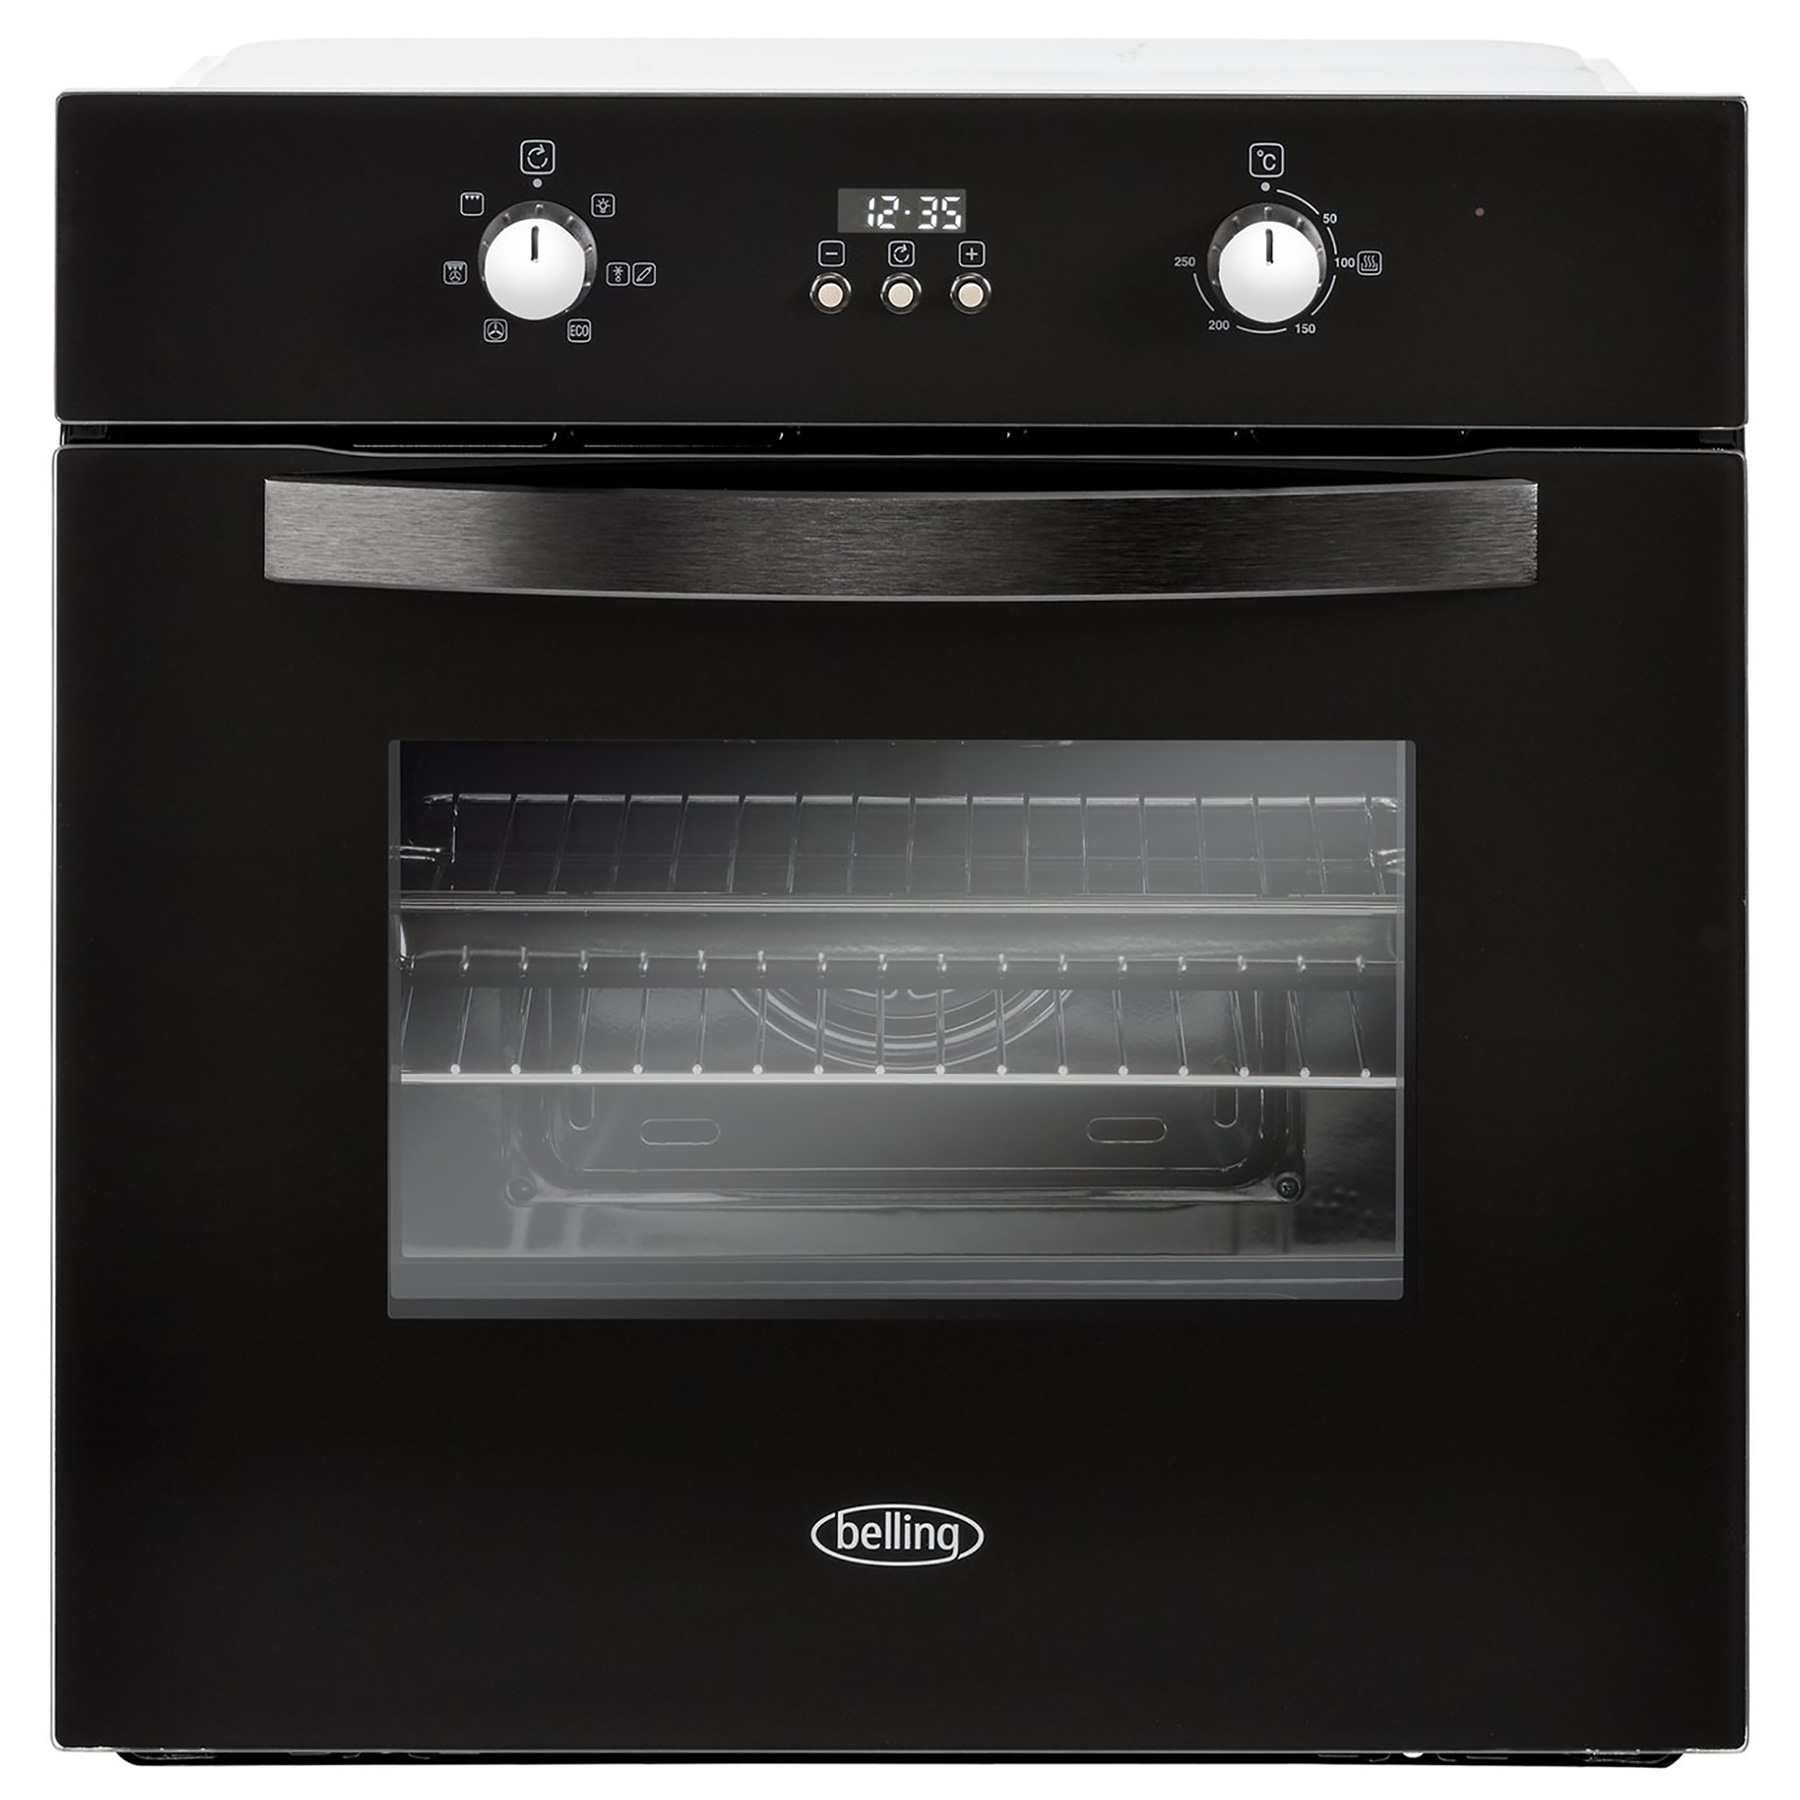 Image of Belling 444410815 Built In Electric Single Oven in Black 70L A Rated